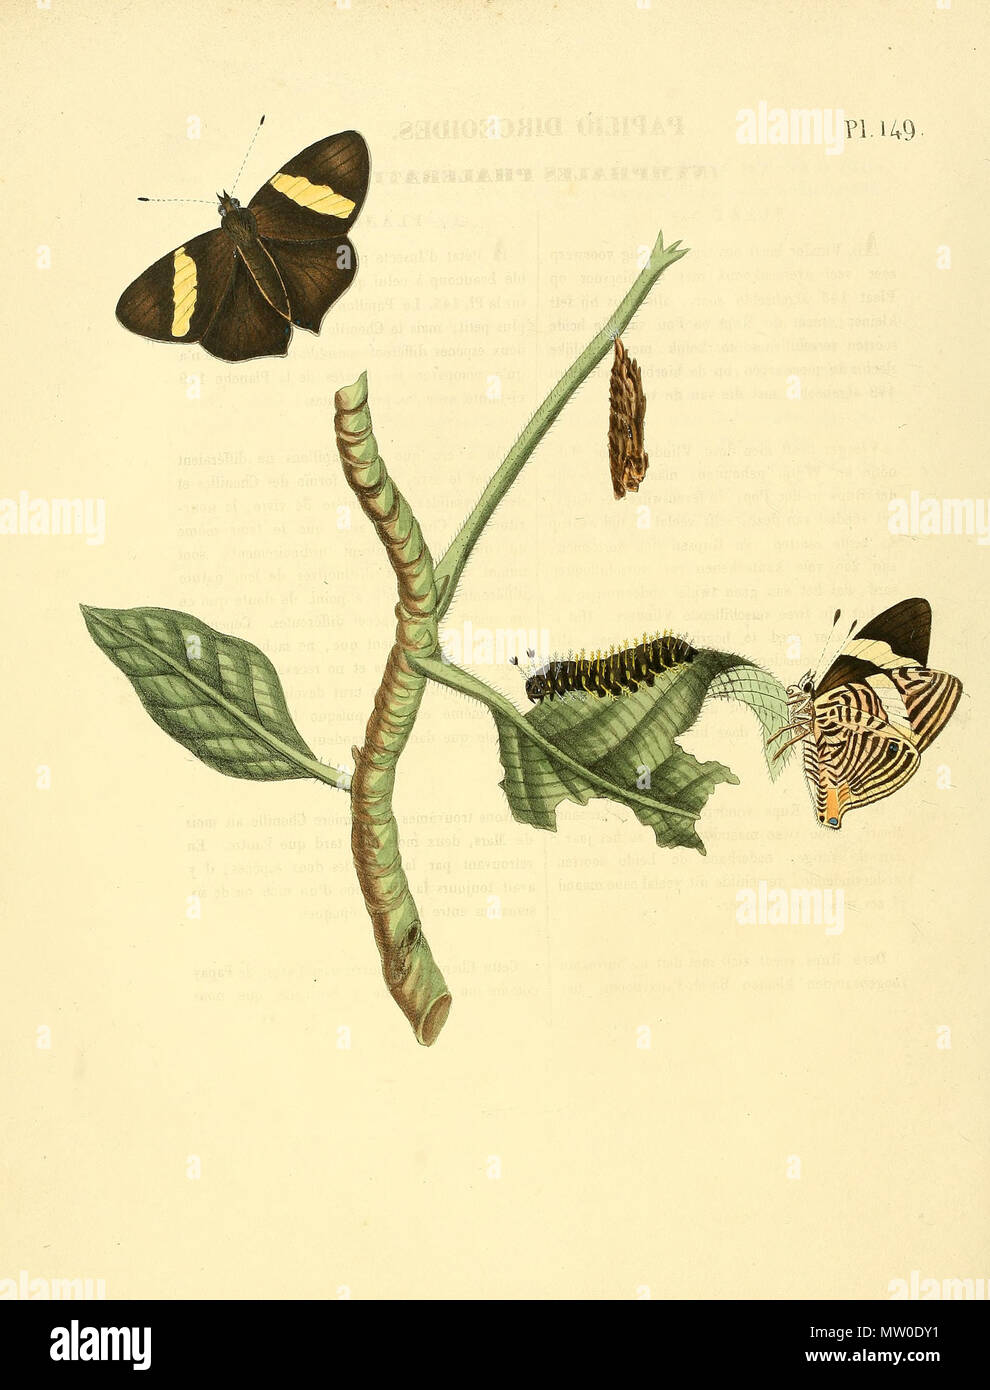 . Illustration of: Colobura dirce (as syn. Papilio dirceoides) This spec. is also depicted in plate 145 as Papilio dirce) . 1852. Jan Sepp (1778 - 1853) 552 Sepp-Surinaamsche vlinders - pl 149 plate Colobura dirce Stock Photo